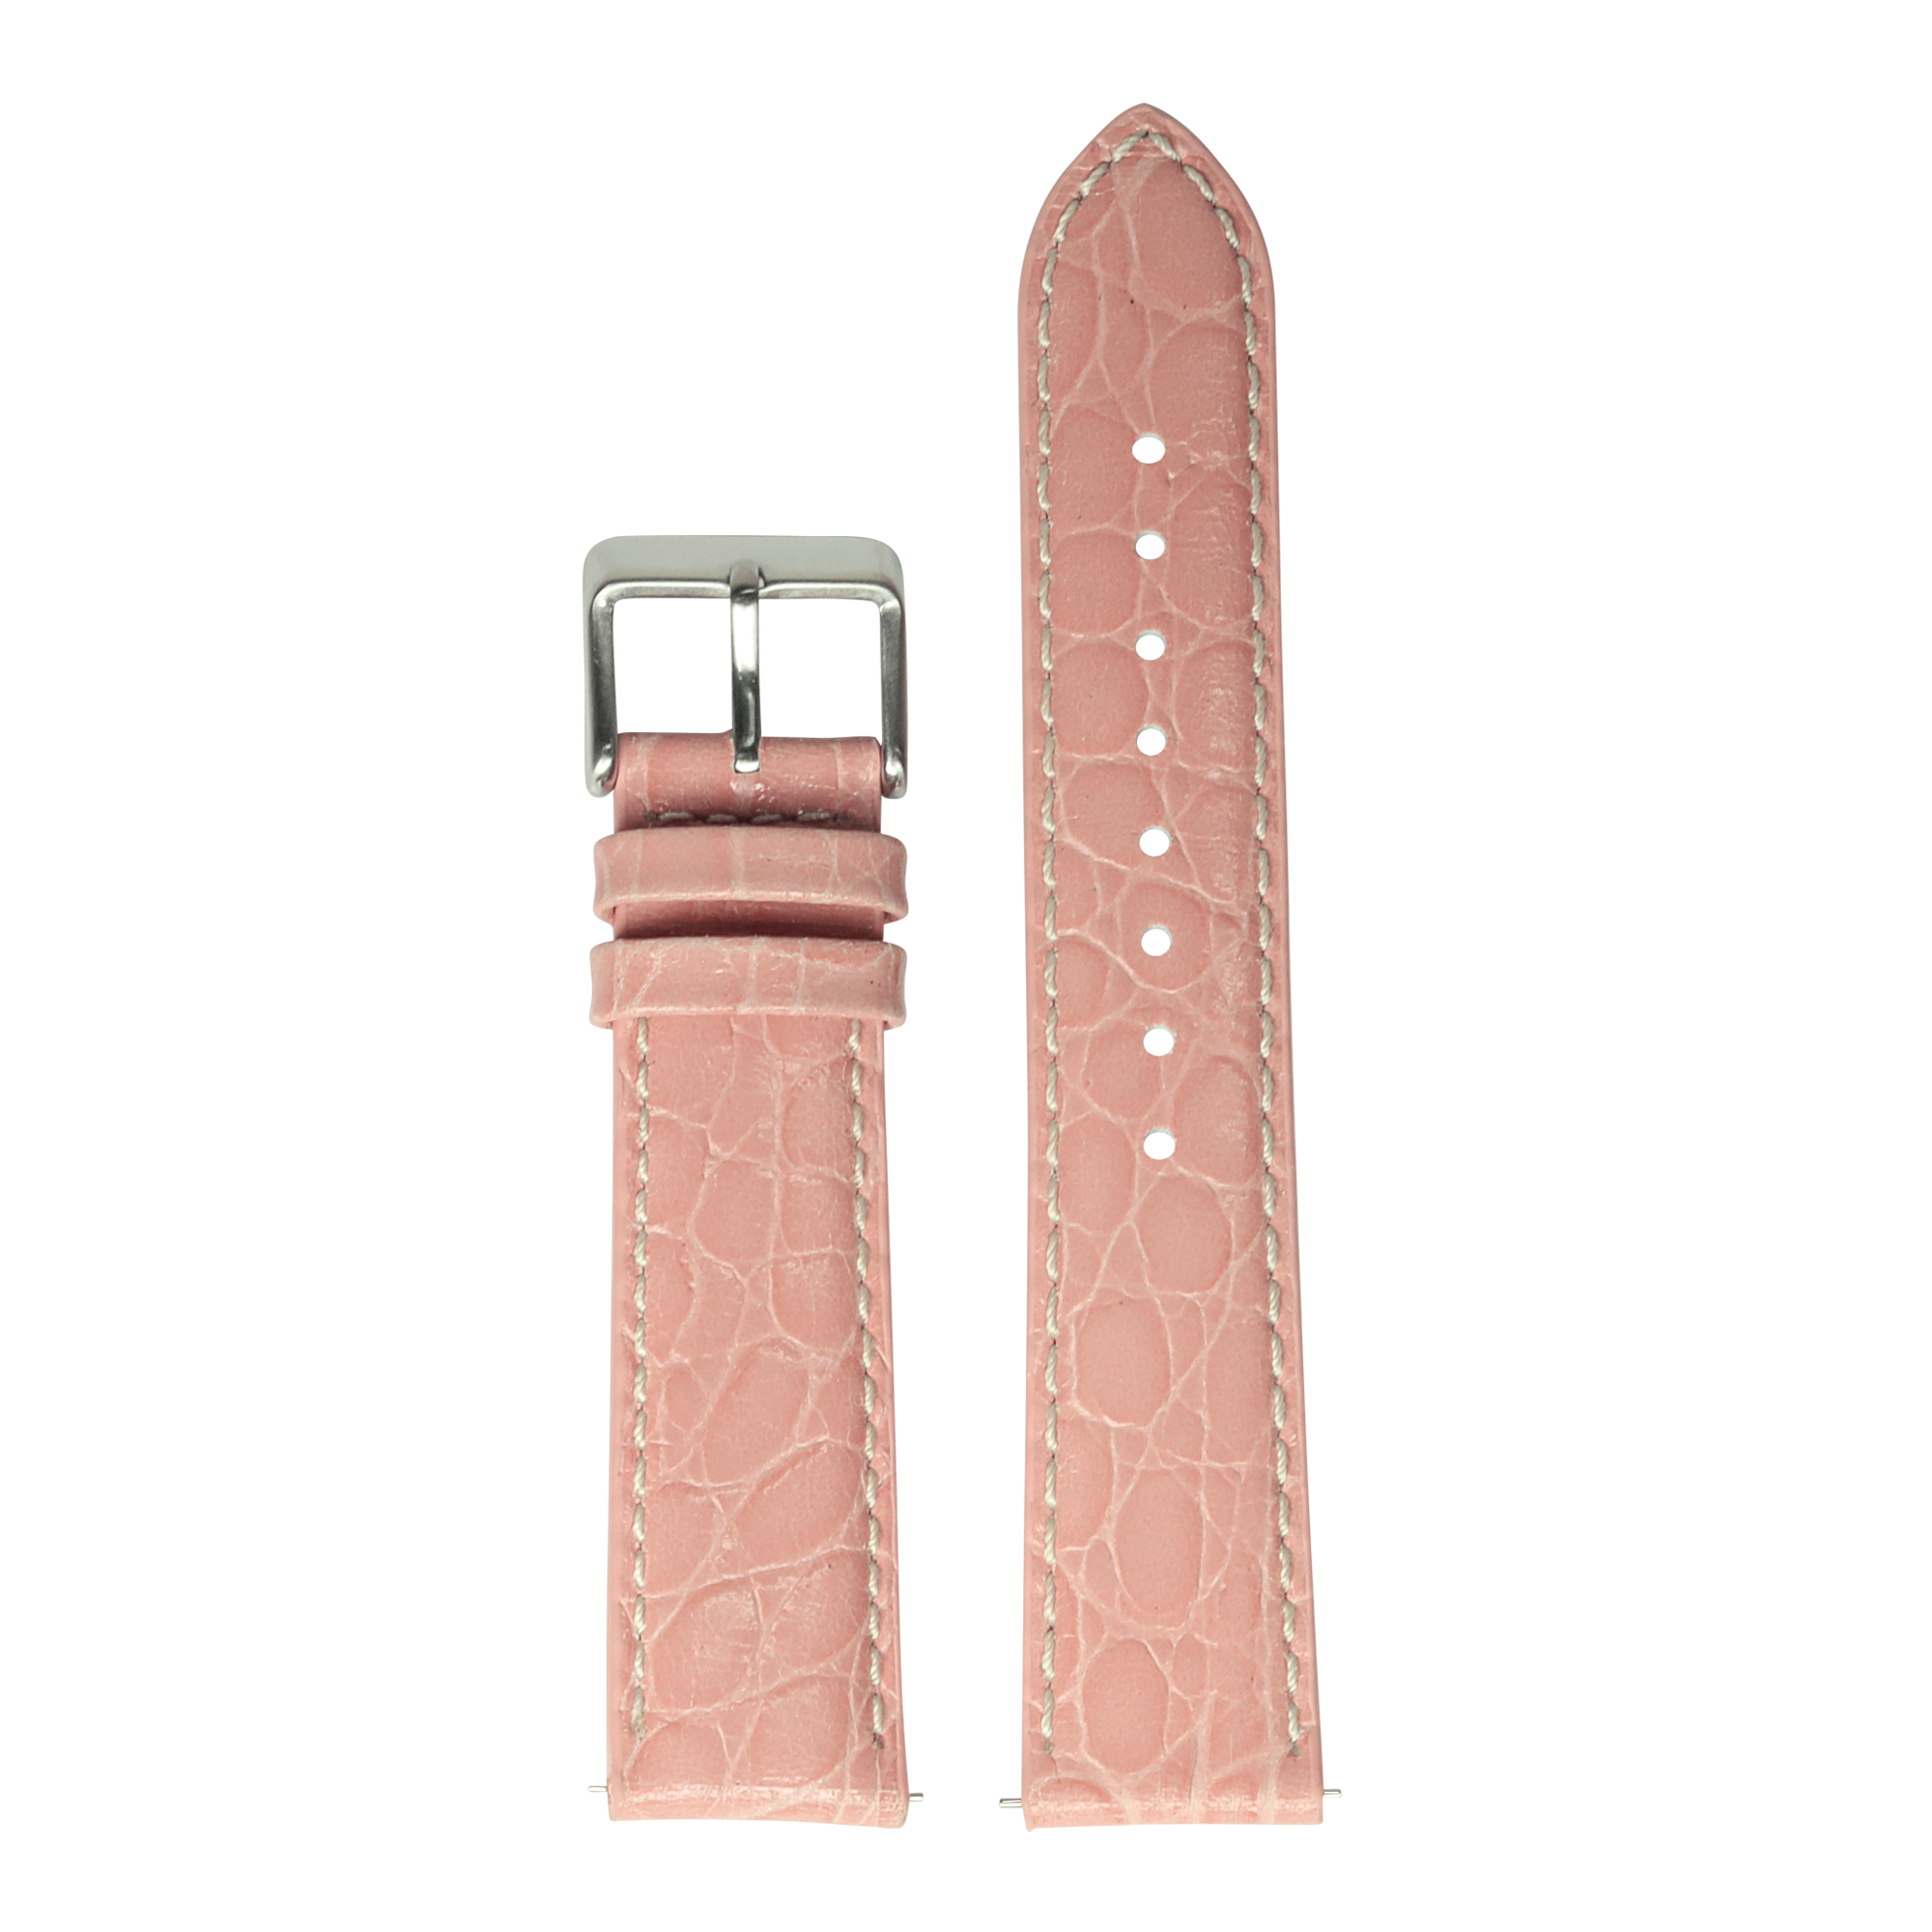 [QuickFit] Alligator Leather - Pink with White Stitching 26mm